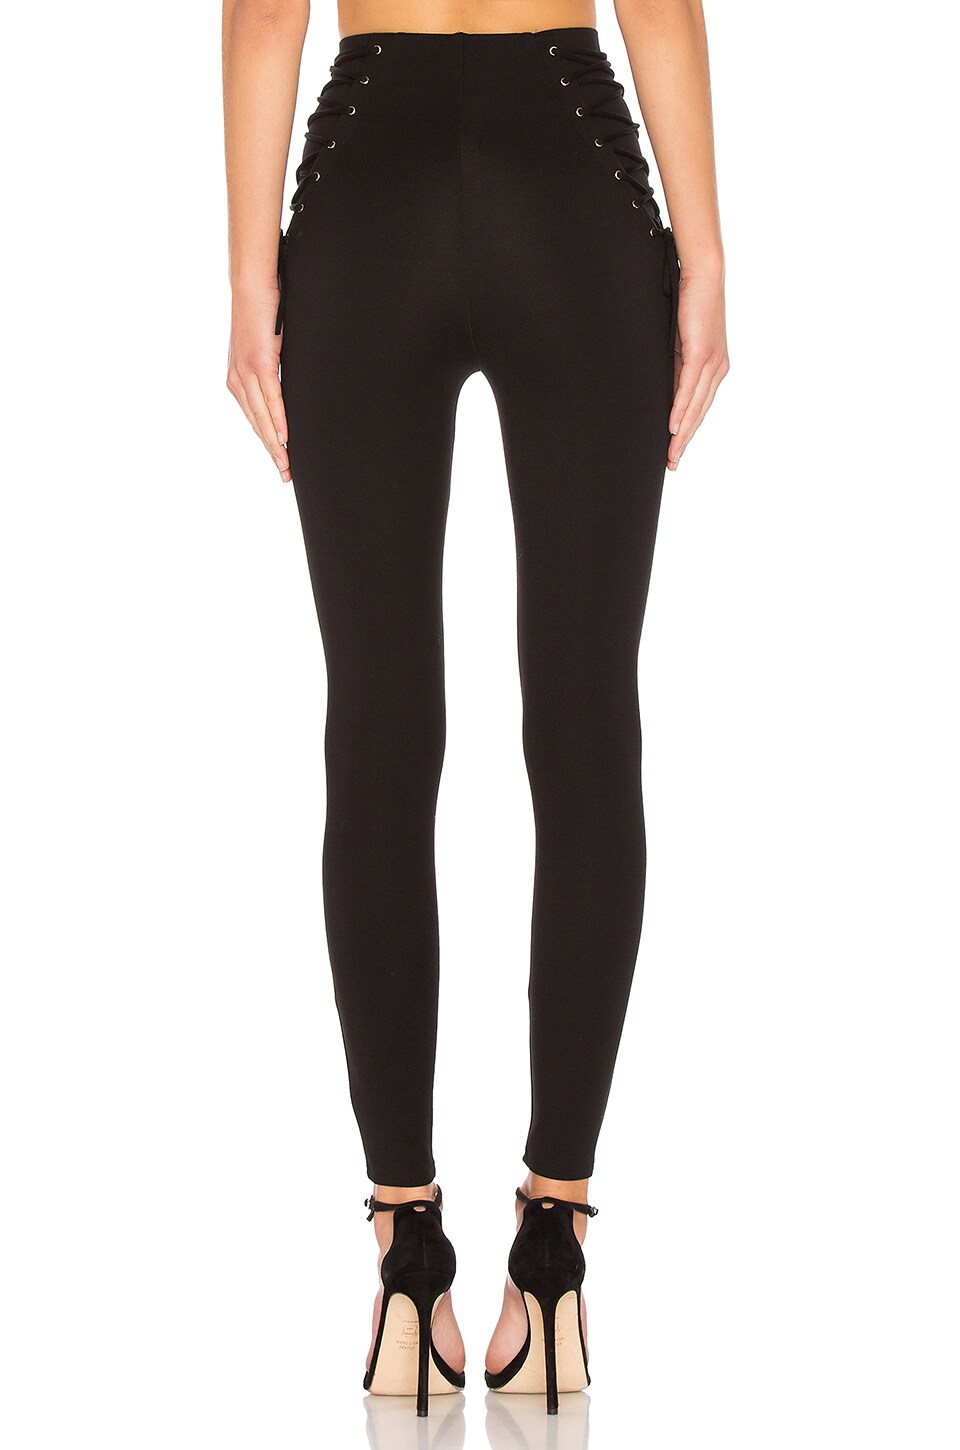 h:ours x REVOLVE High and Wild Legging in Black | REVOLVE